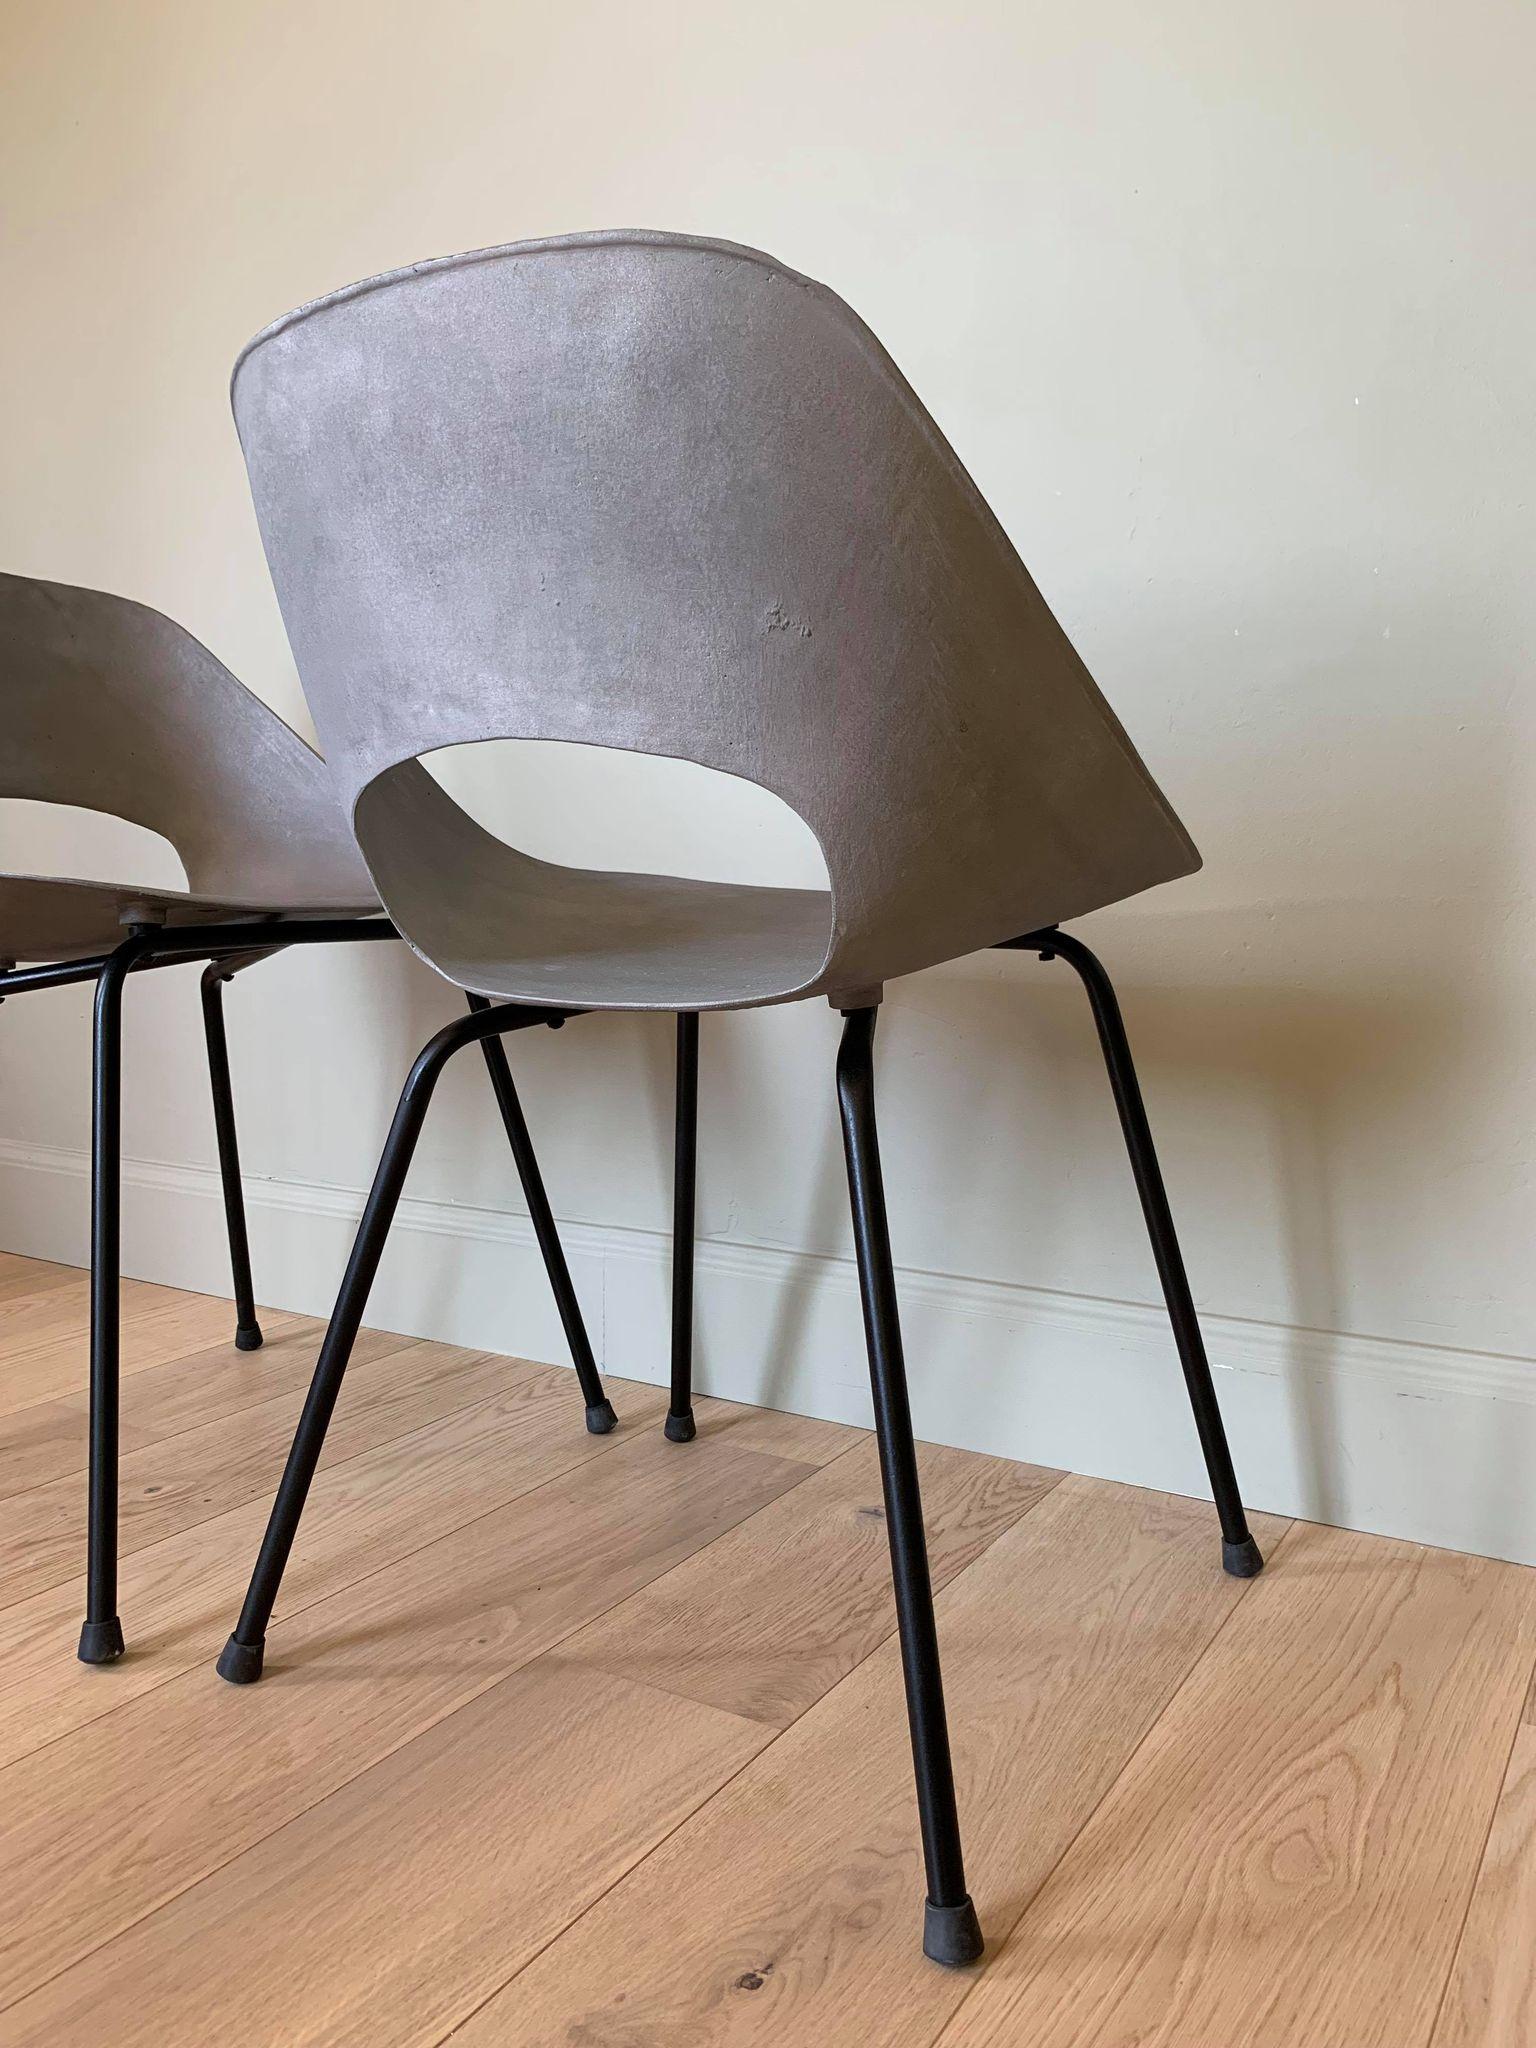 French Pair of Mid-Century Aluminium Chairs by Pierre Guariche for Steiner, France 1953